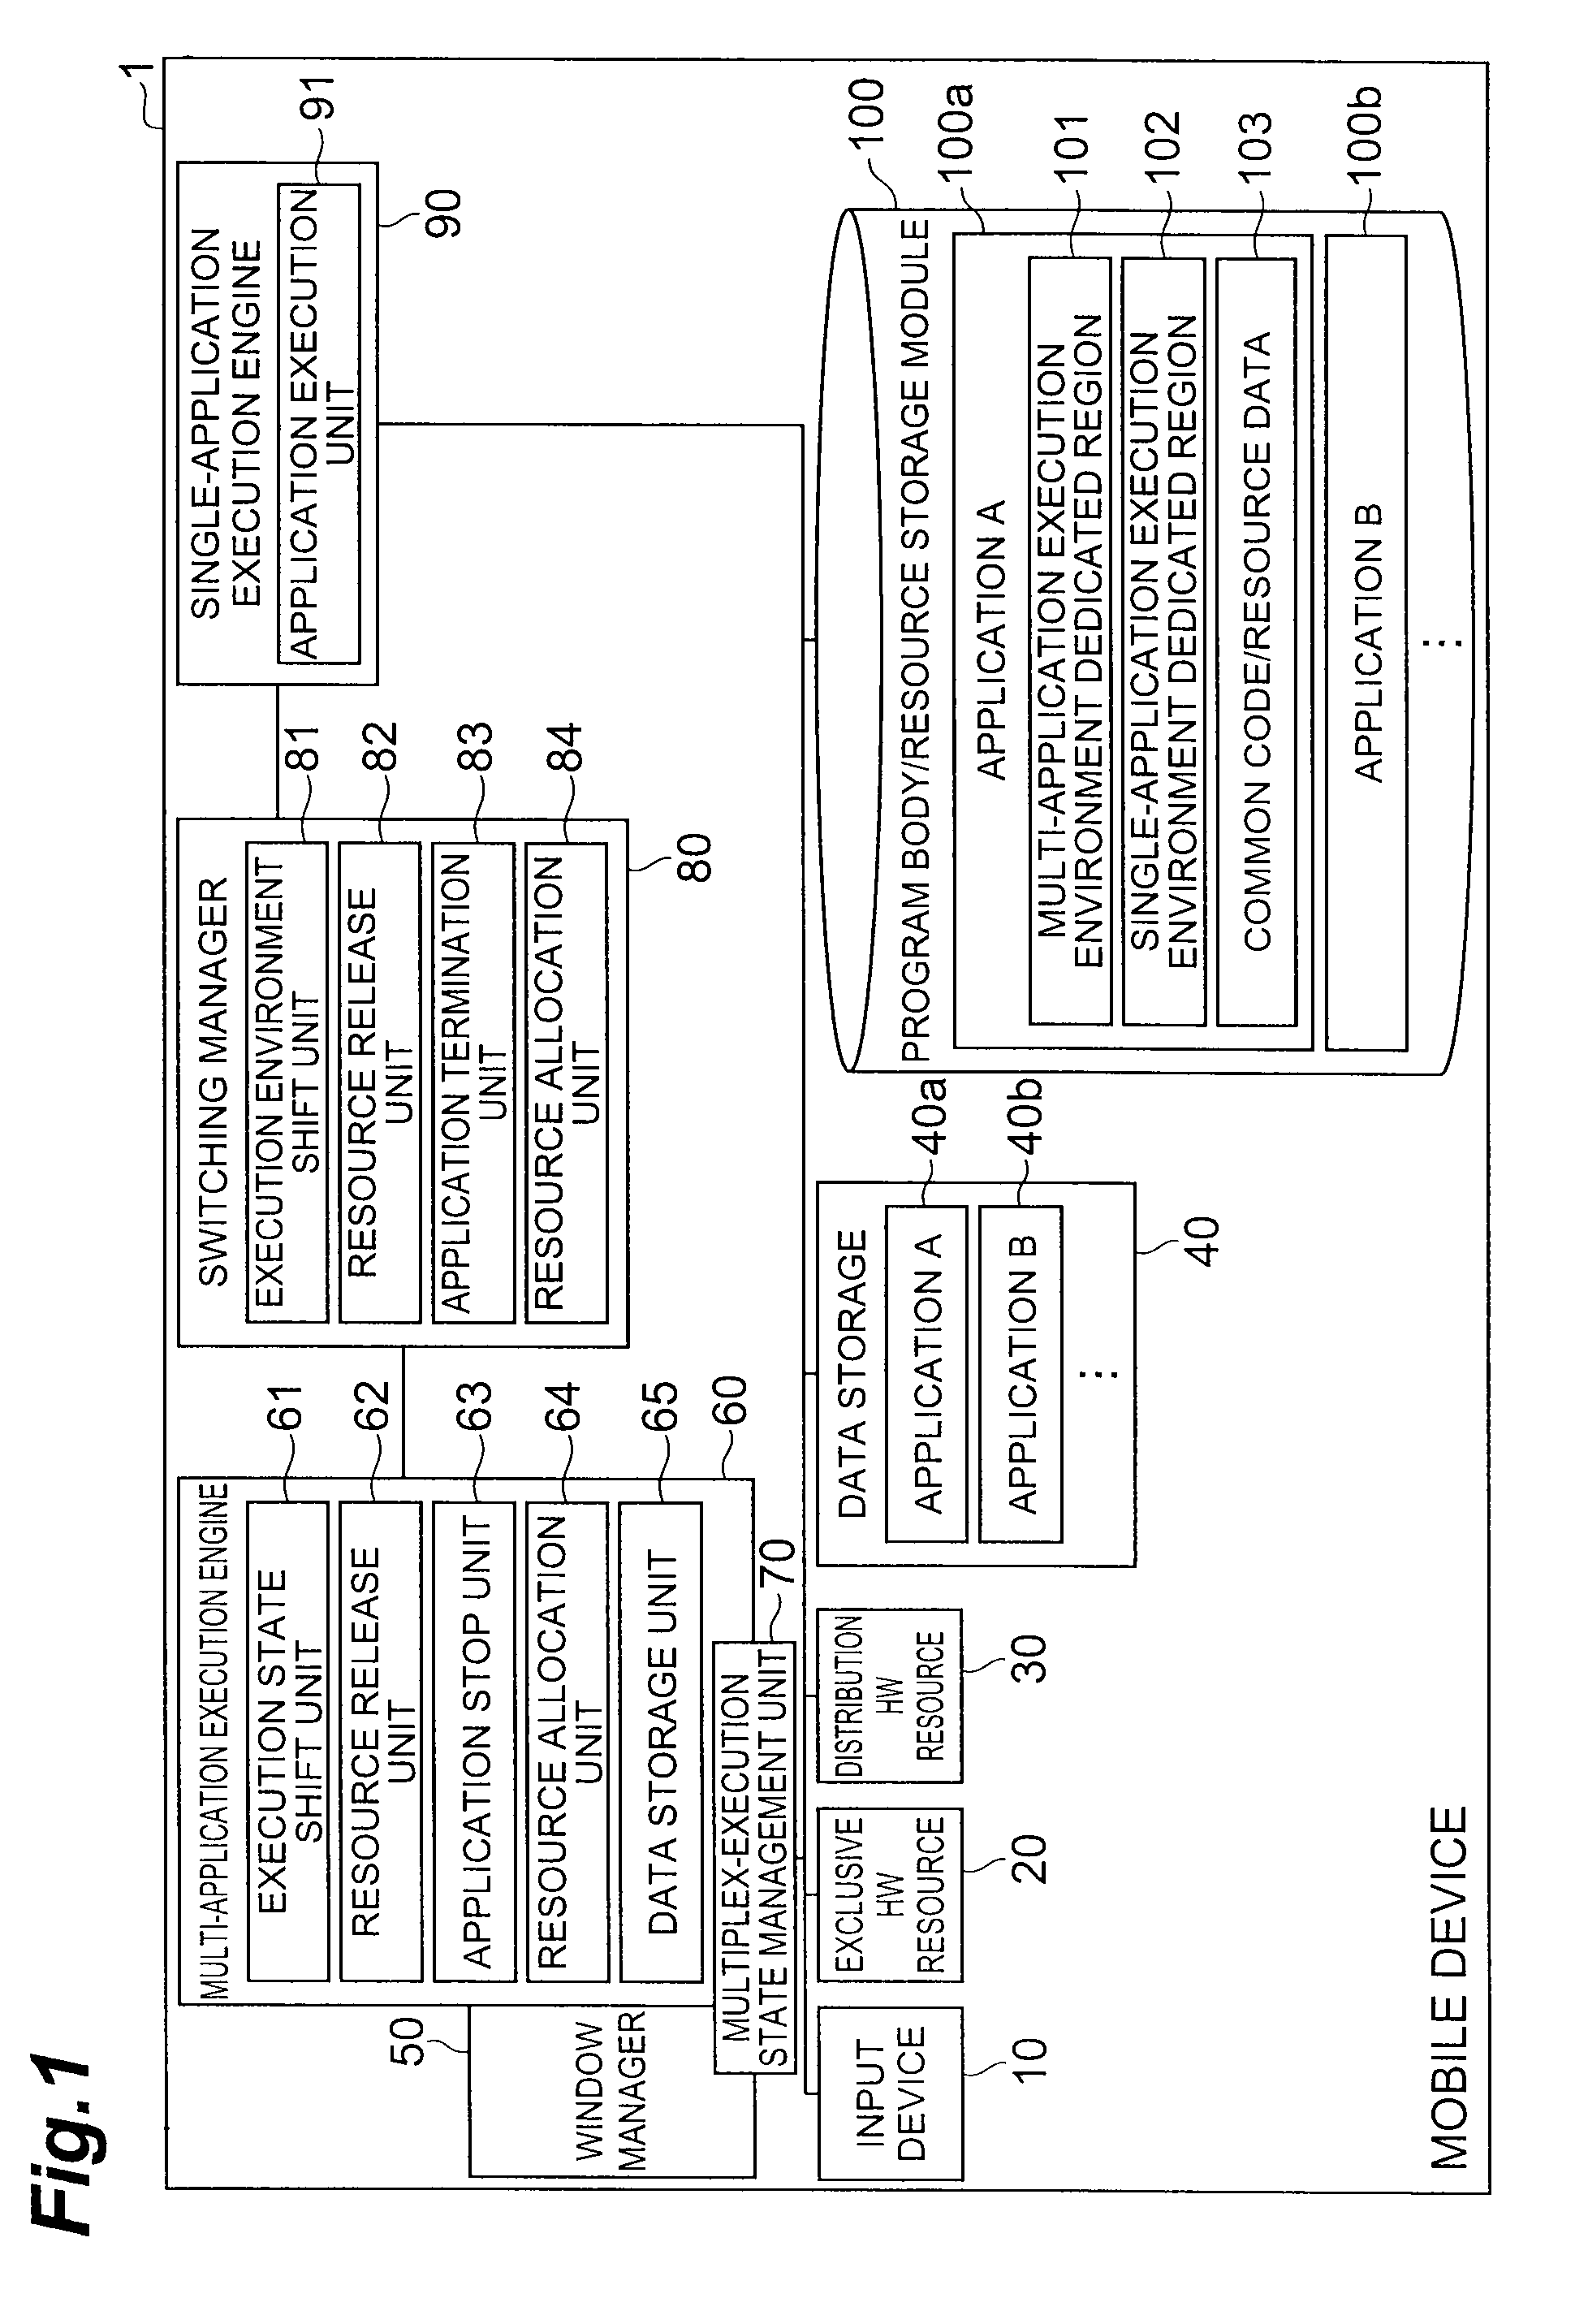 Mobile device and application switching method